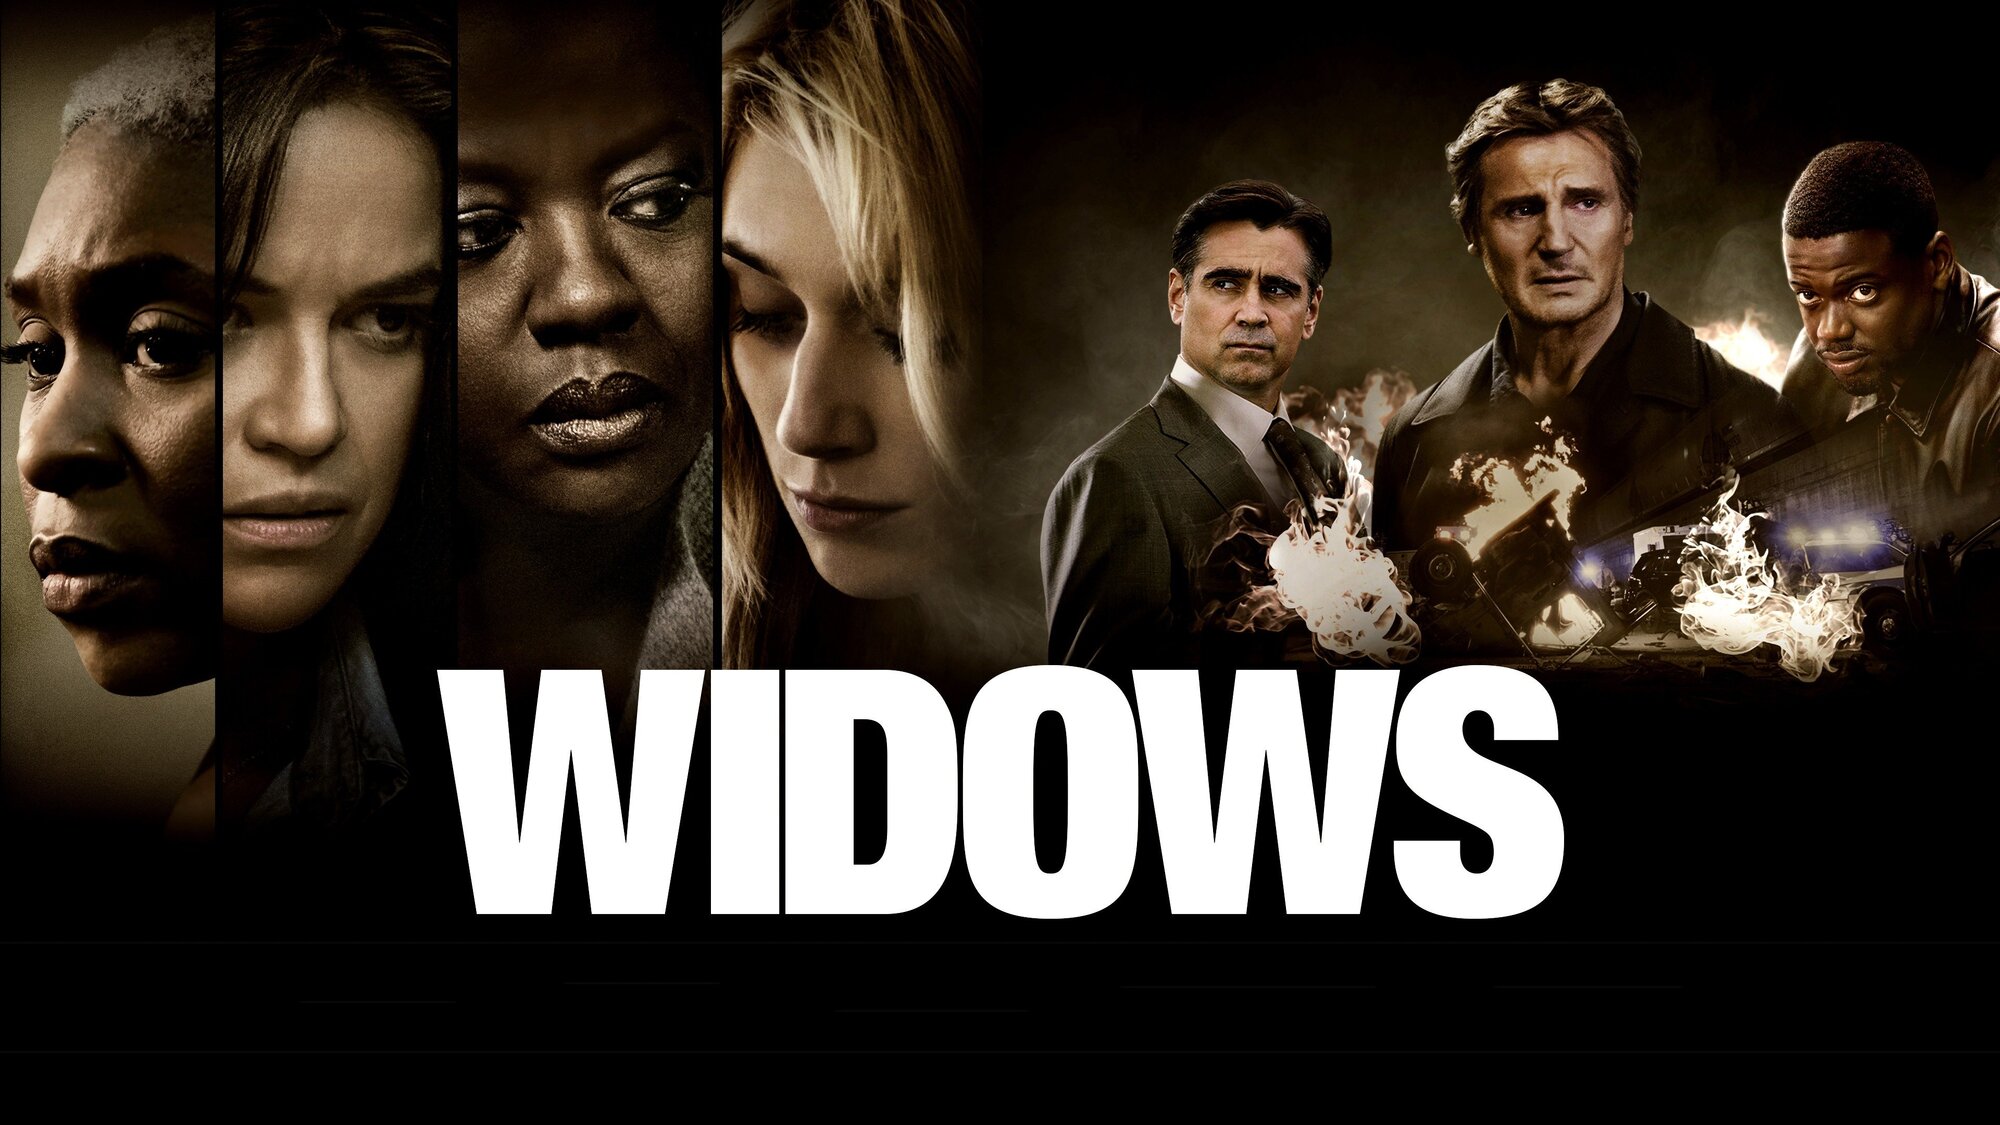 41-facts-about-the-movie-widows